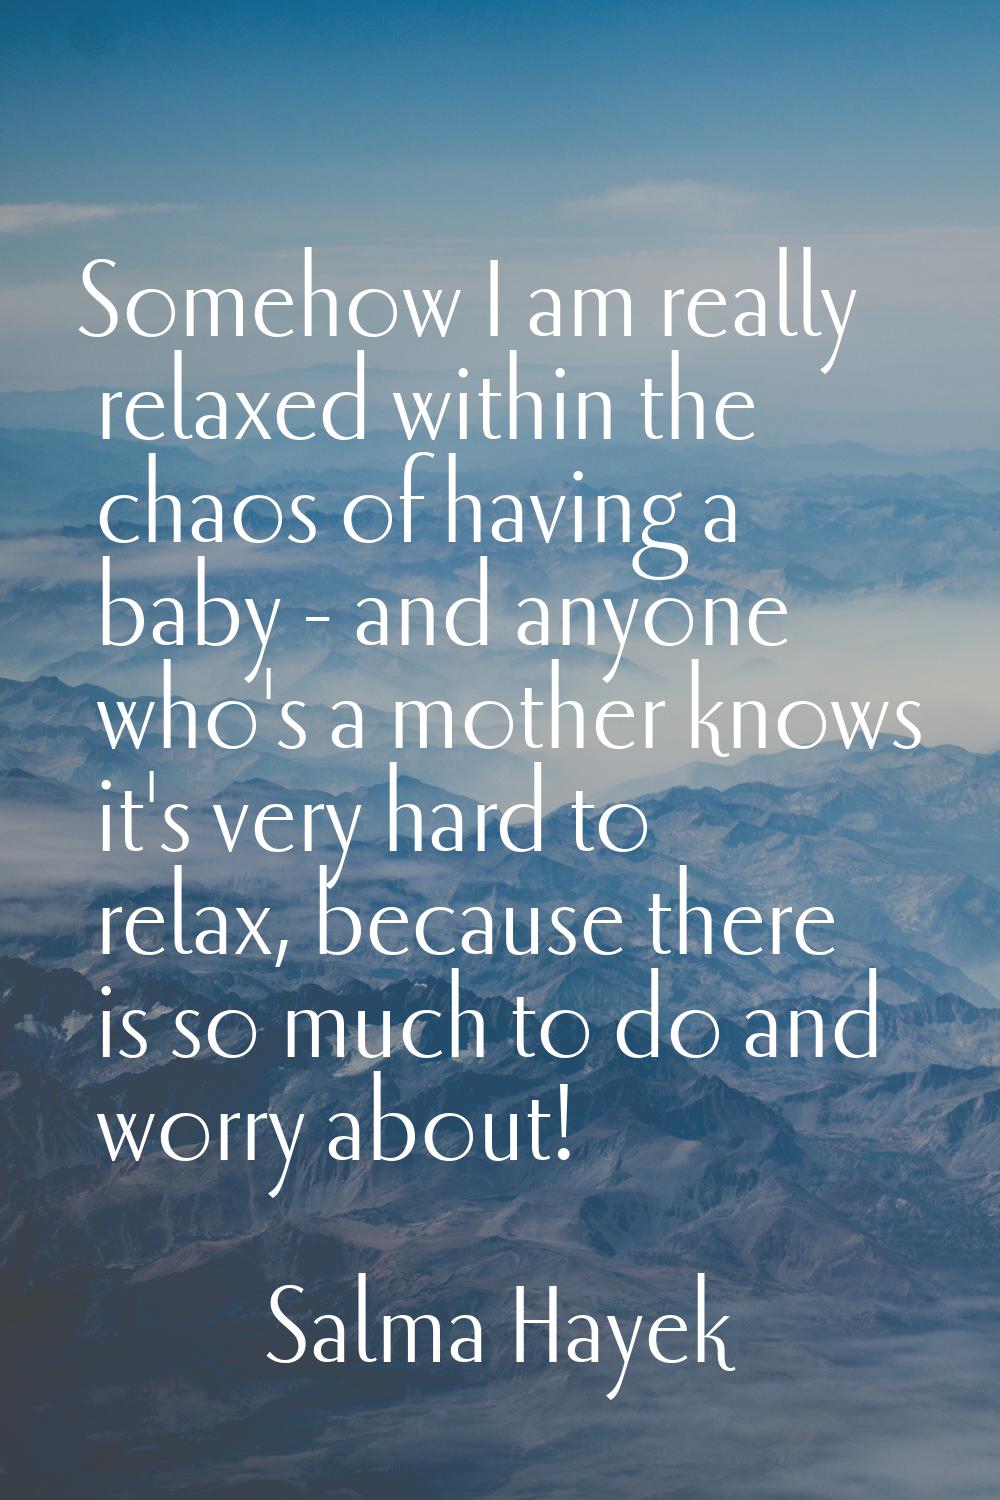 Somehow I am really relaxed within the chaos of having a baby - and anyone who's a mother knows it'